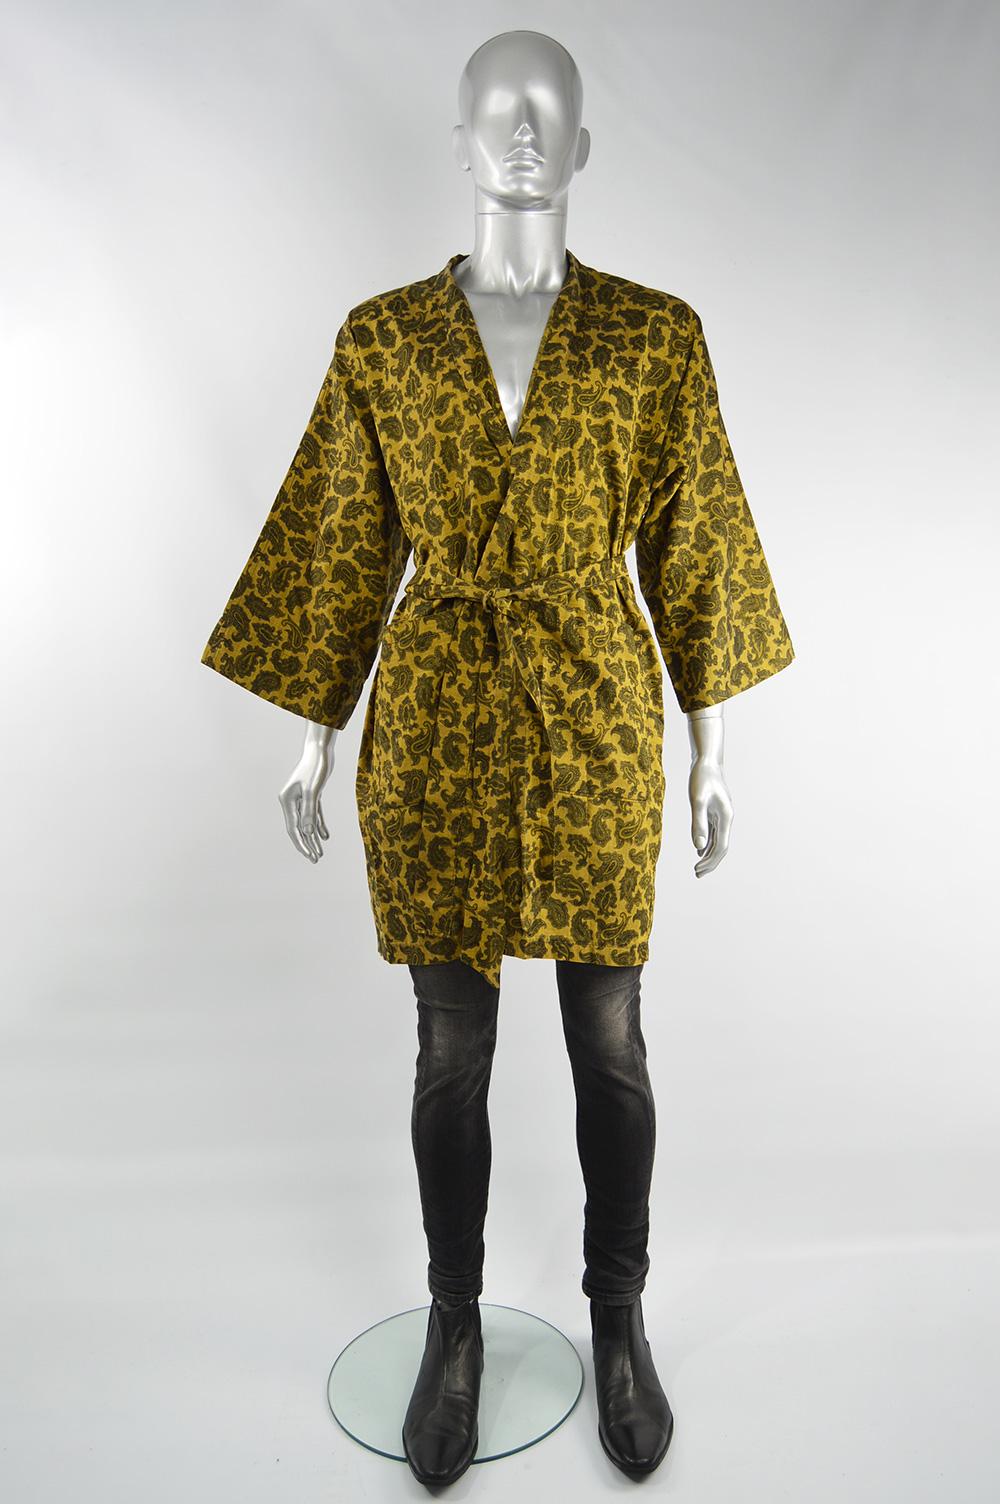 An incredibly stylish vintage men's robe/ smoking jacket from the 60s by John Porter. In a gold paisley Liberty of London printed fabric with wide sleeves and a matching belt. It would look great as loungewear or worn without the belt as part of a